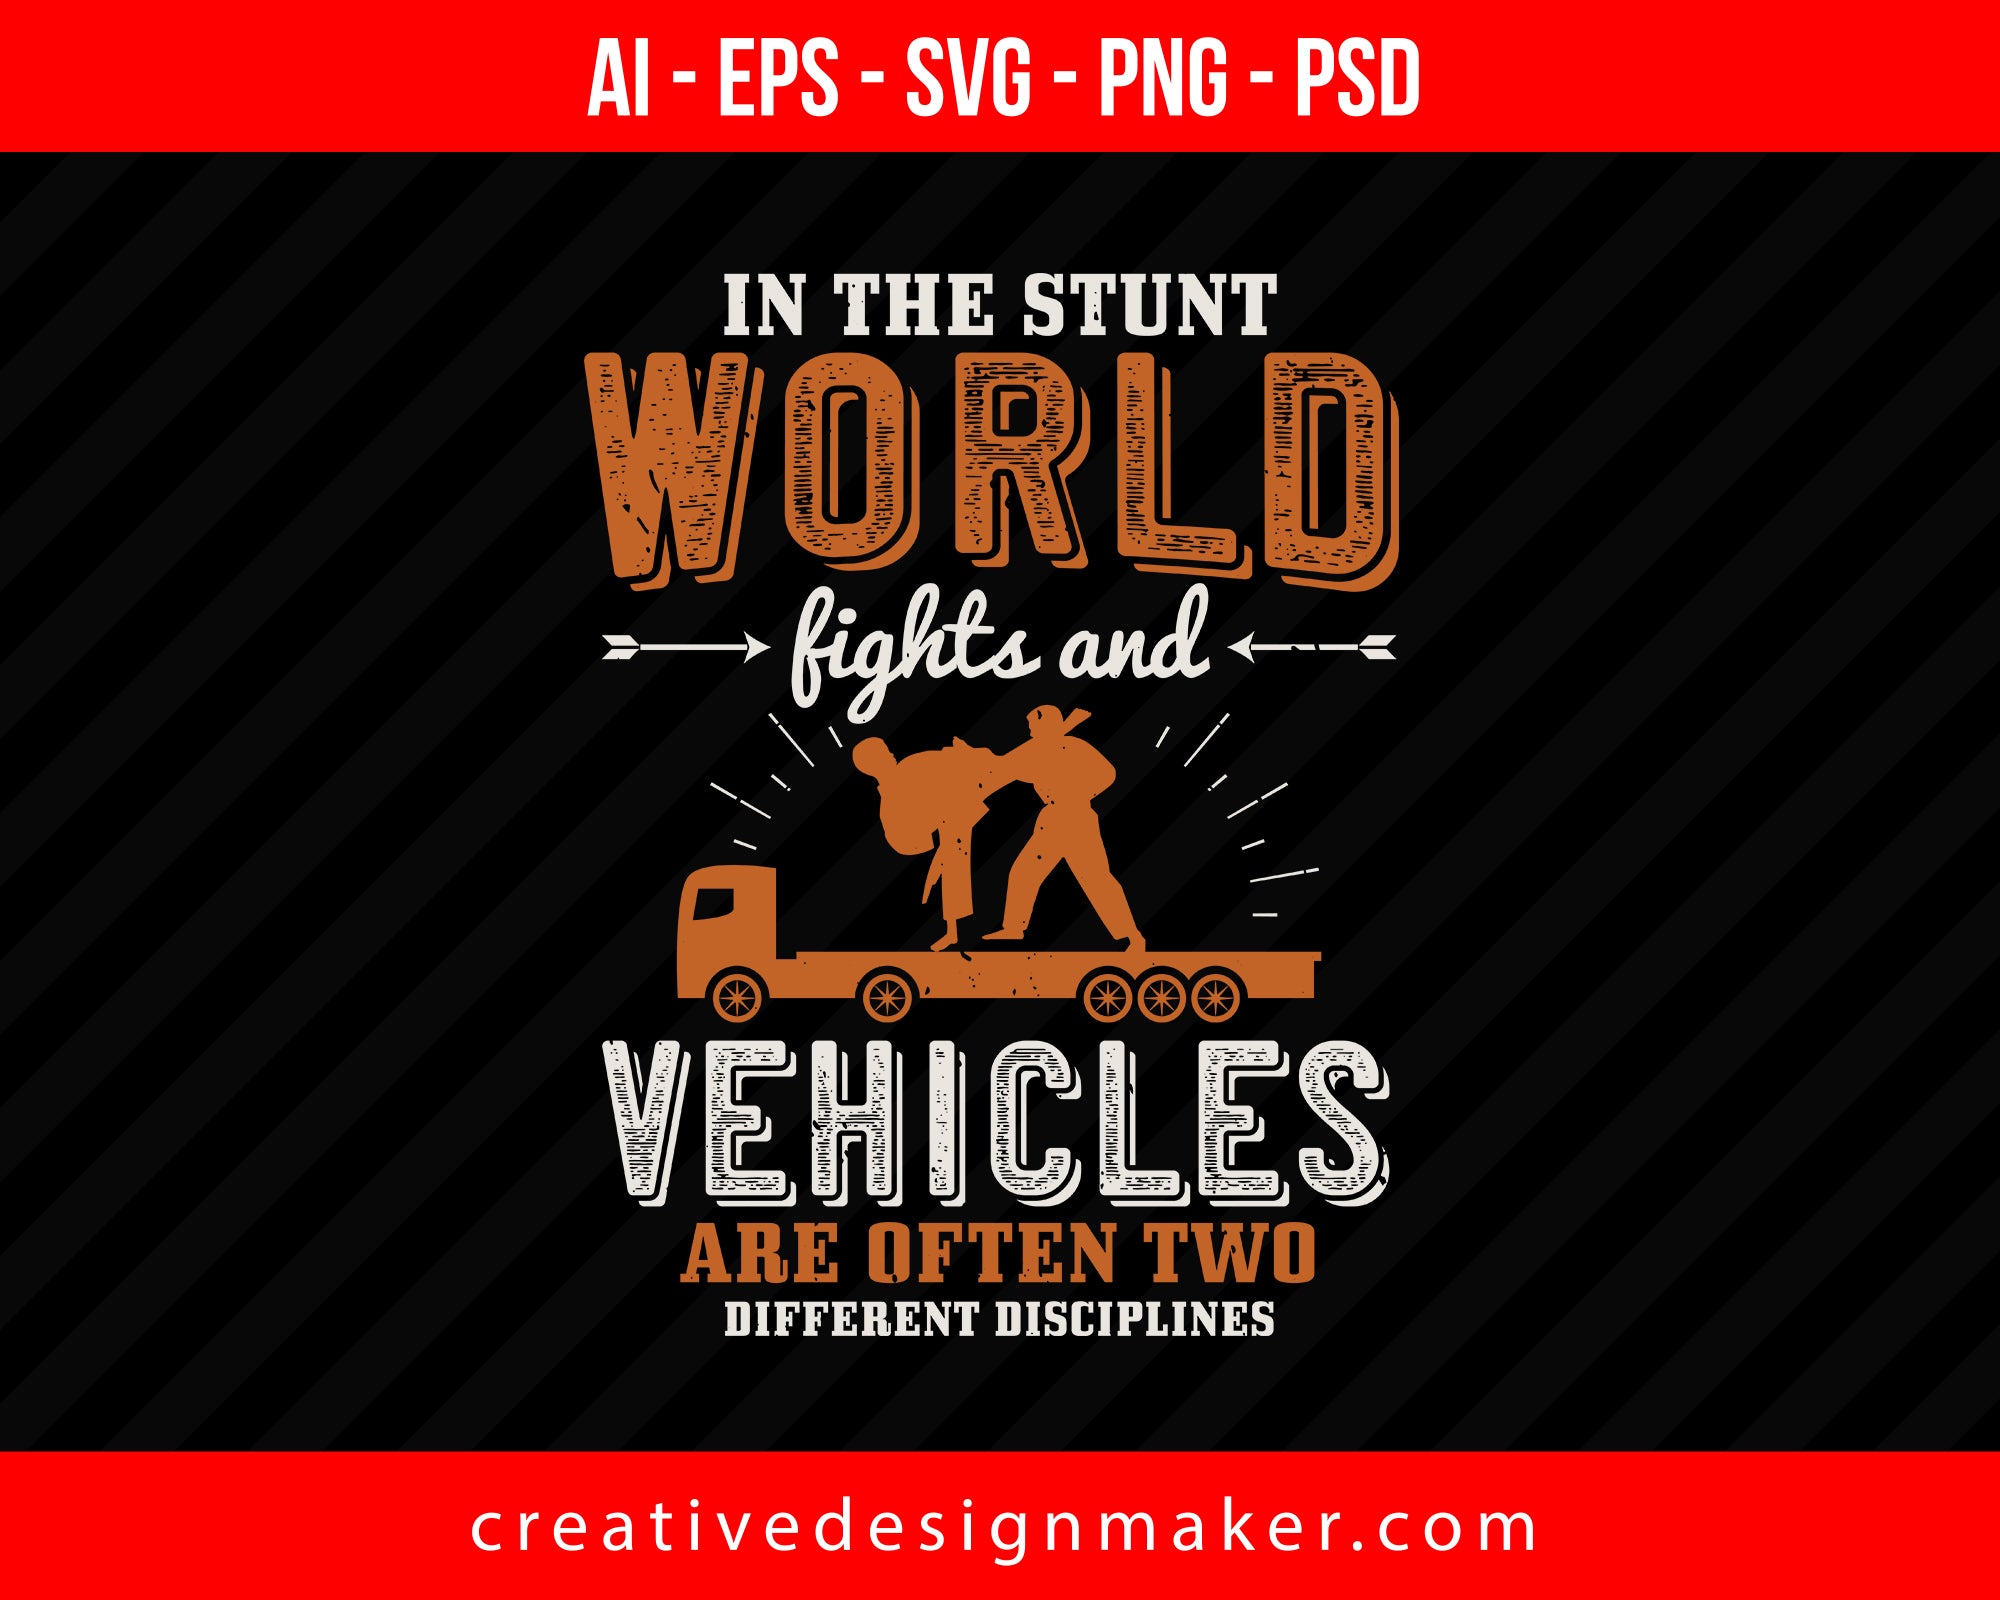 In the stunt world, fights and vehicles are often two different disciplines Print Ready Editable T-Shirt SVG Design!